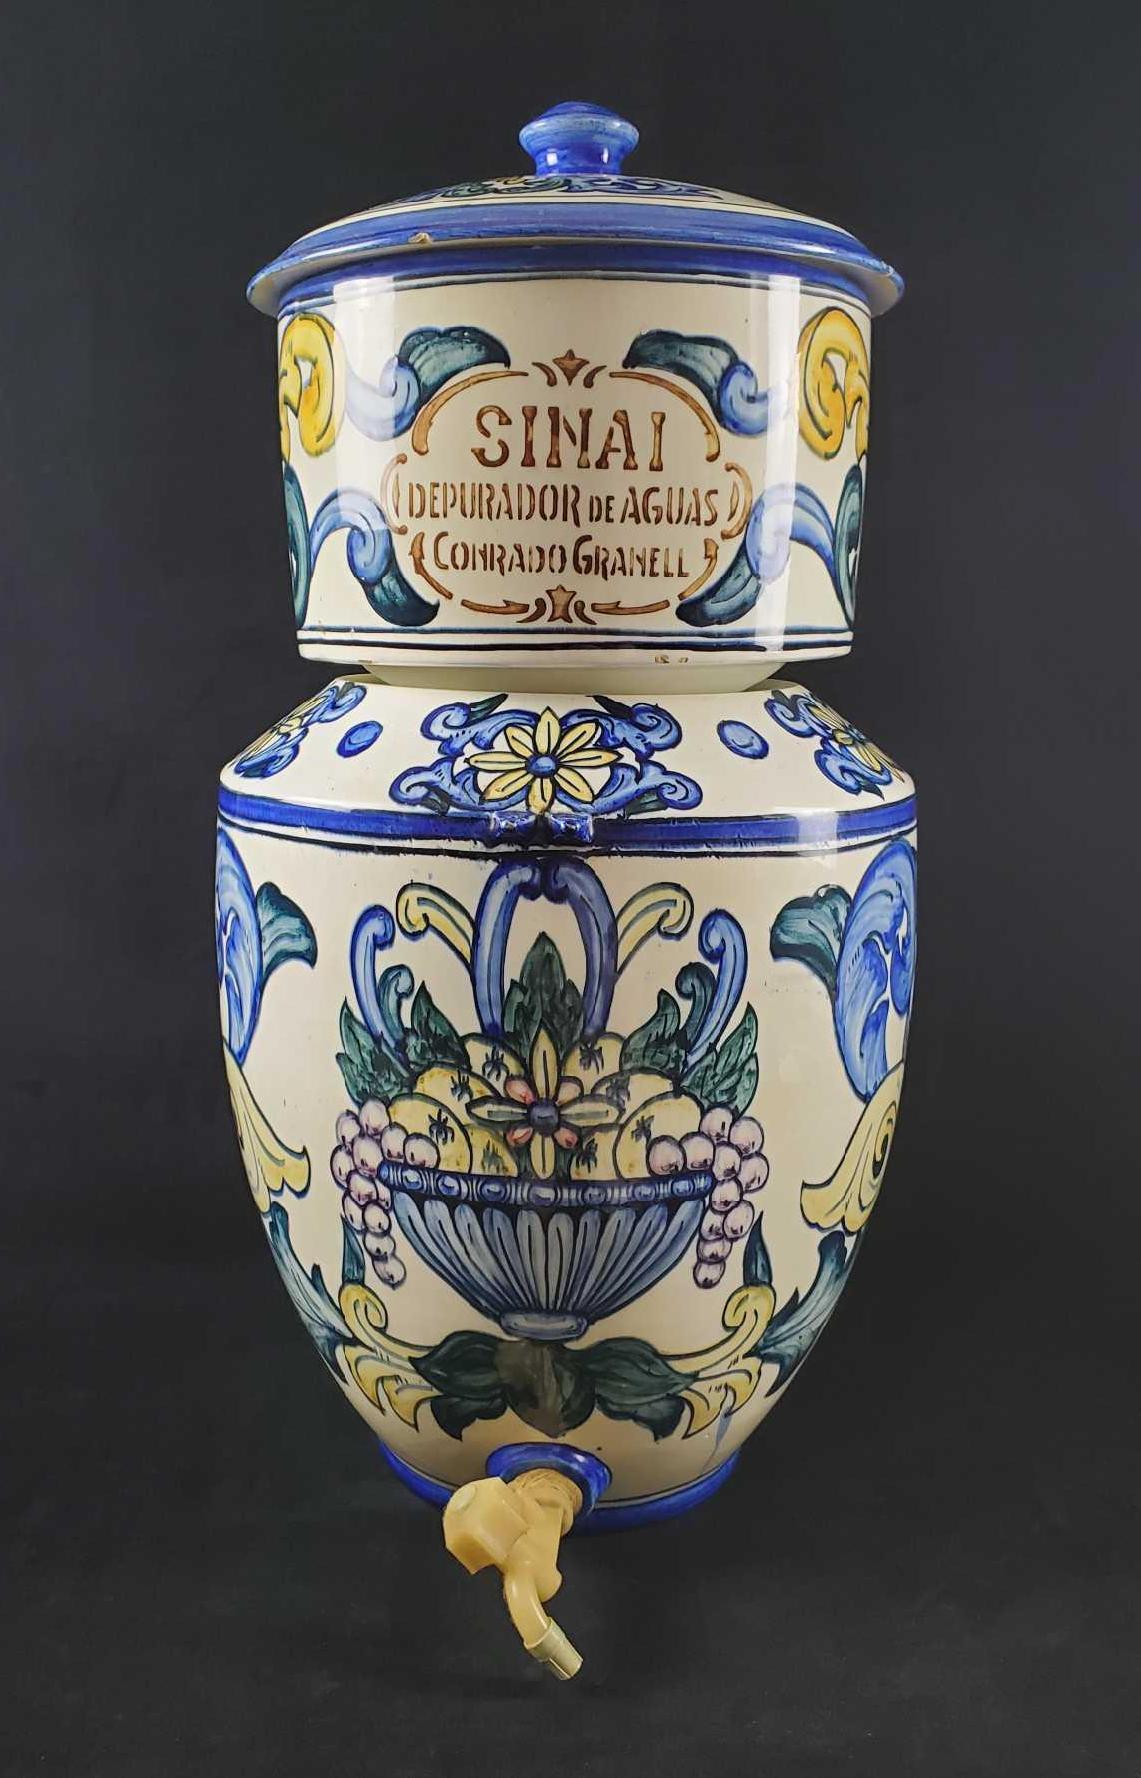 Sold at Auction: Pair of Sascha Brastoff Pottery Examples